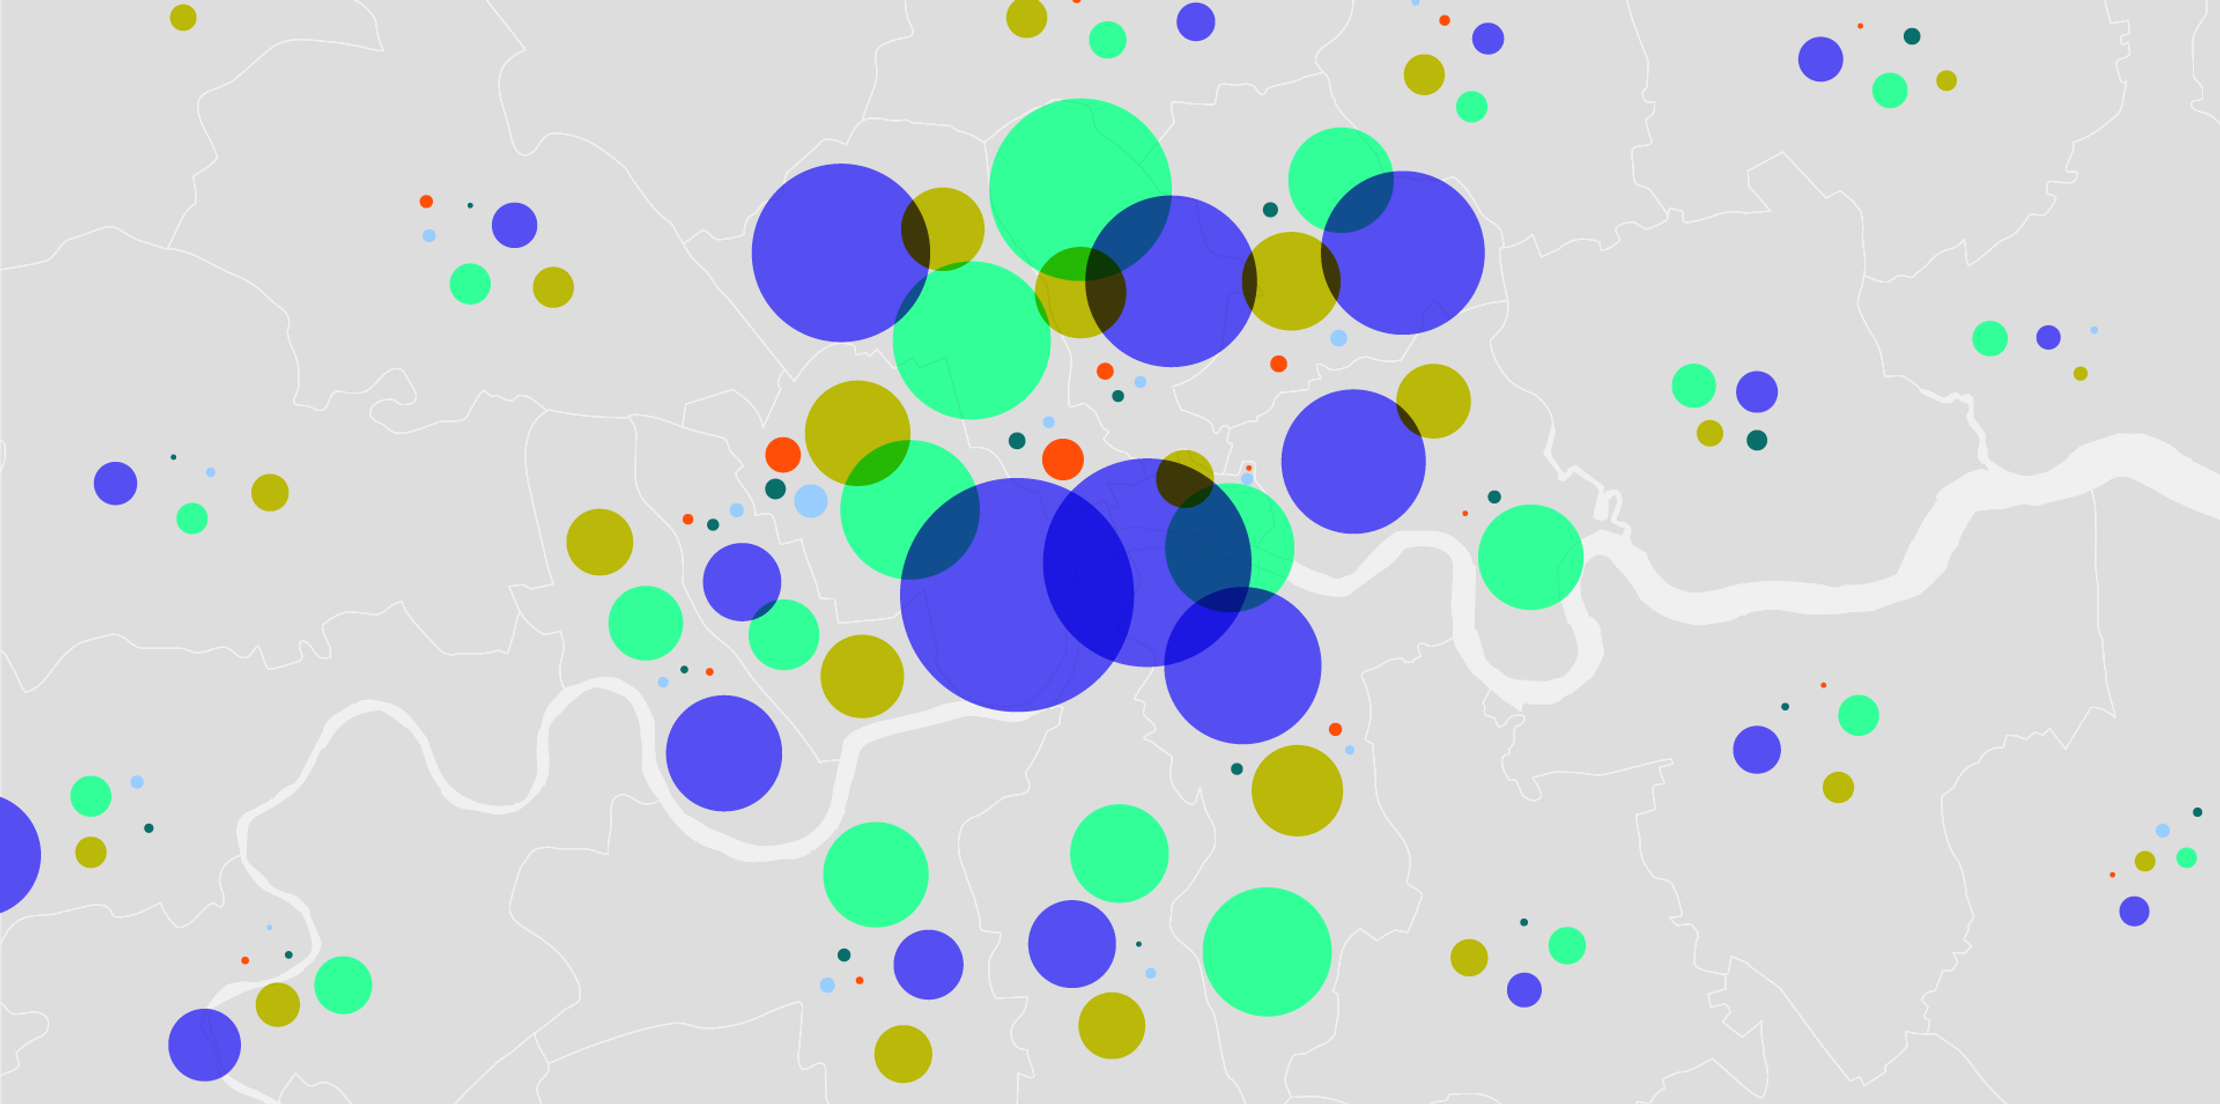 A zoomed-in London map with bubbles shows the number of designers in each borough by size and the discipline by colour.